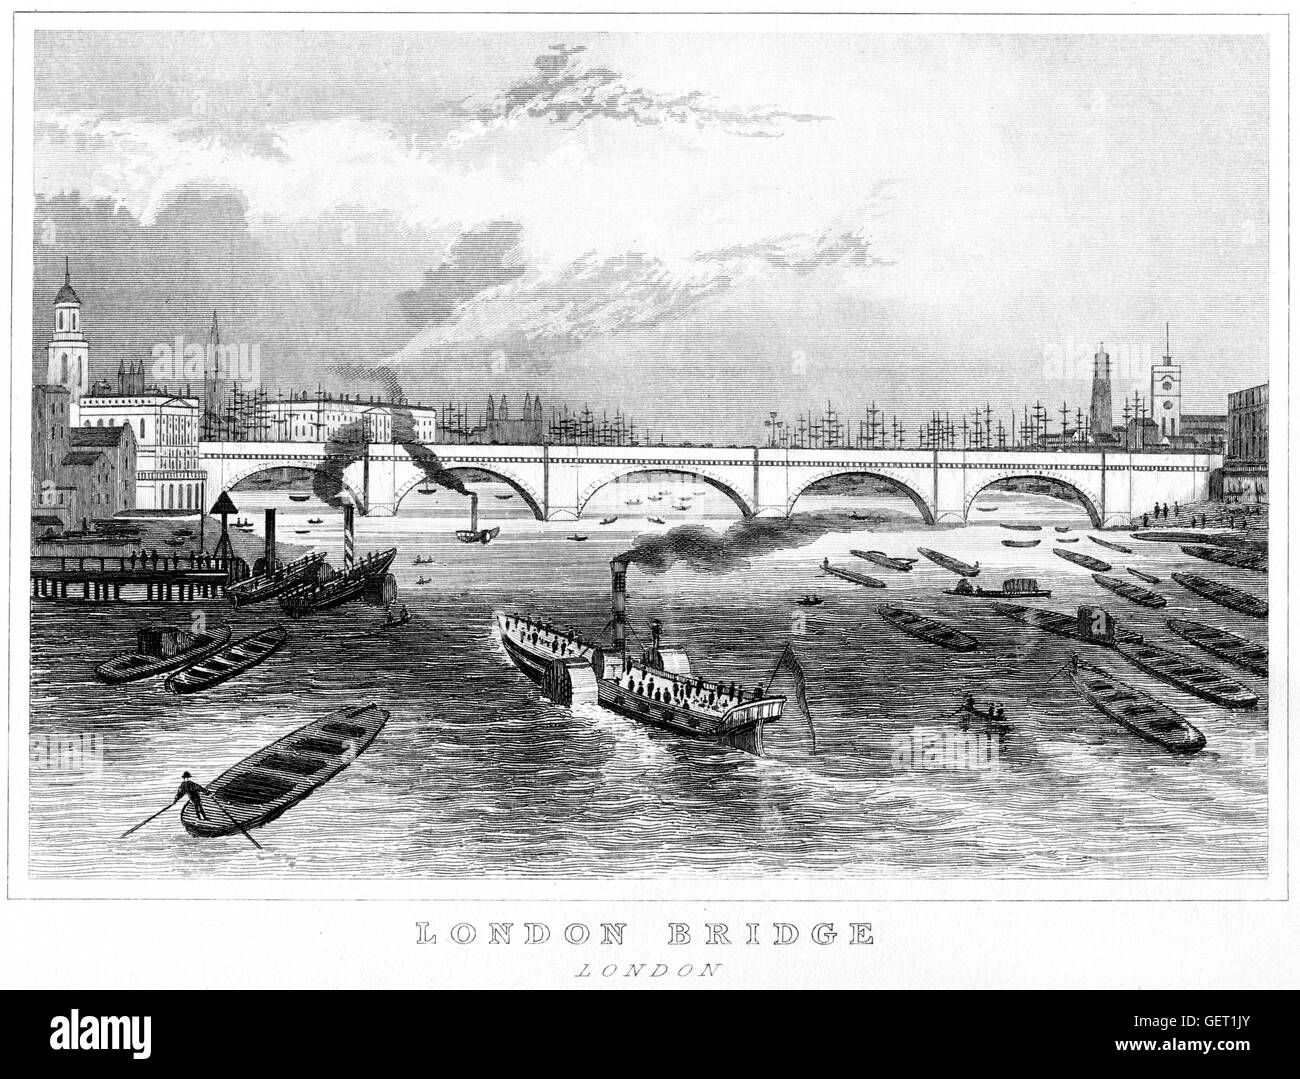 An engraving of London Bridge, London scanned at high resolution from a book printed in 1846. Believed to be copyright free. Stock Photo